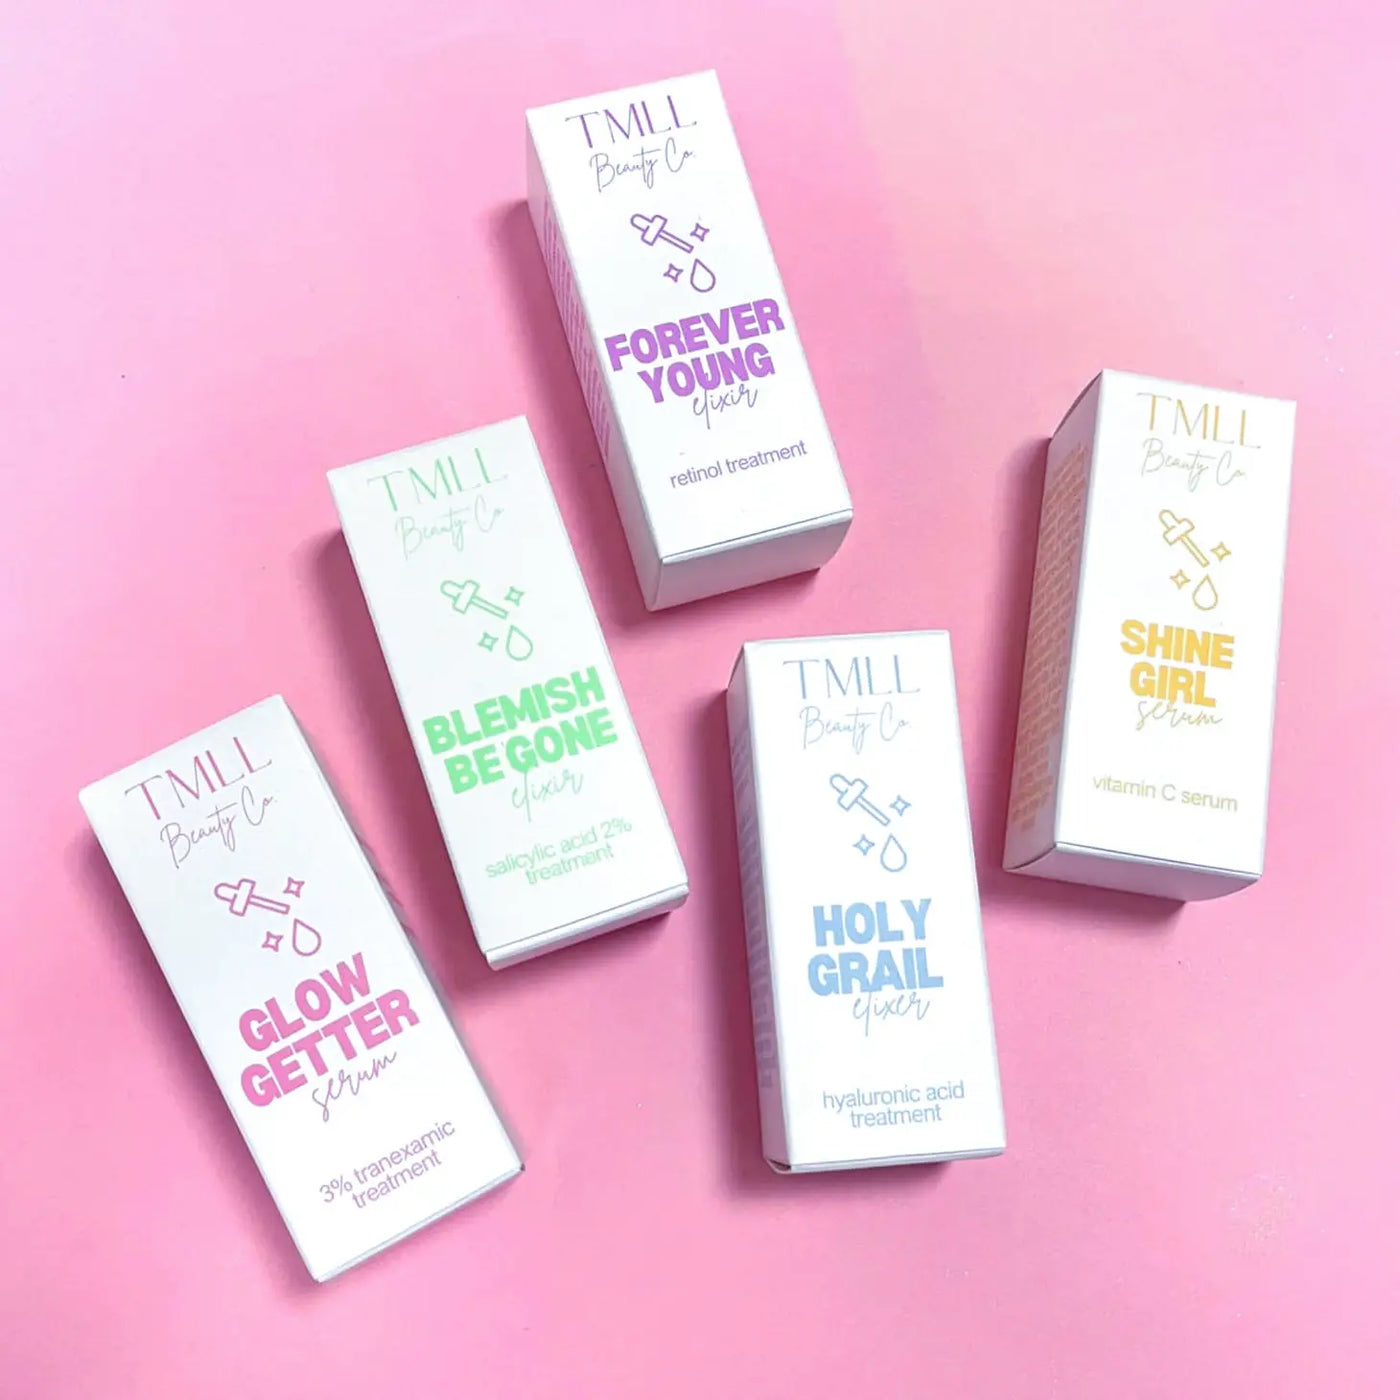 Tmll Skin Candy Forever Young Retinol Elixir